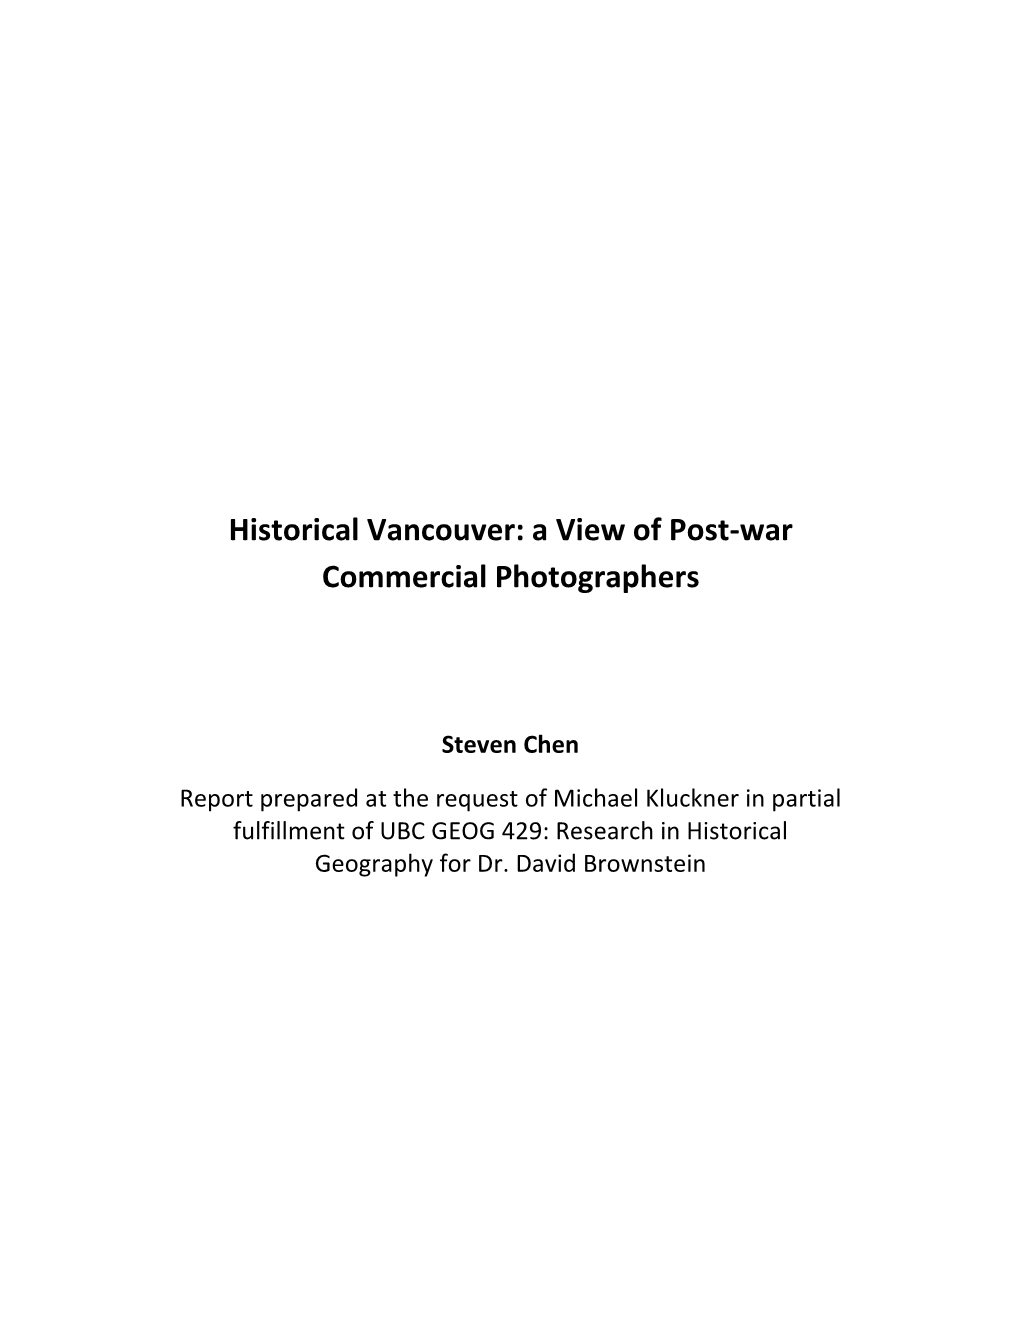 Historical Vancouver: a View of Post-War Commercial Photographers